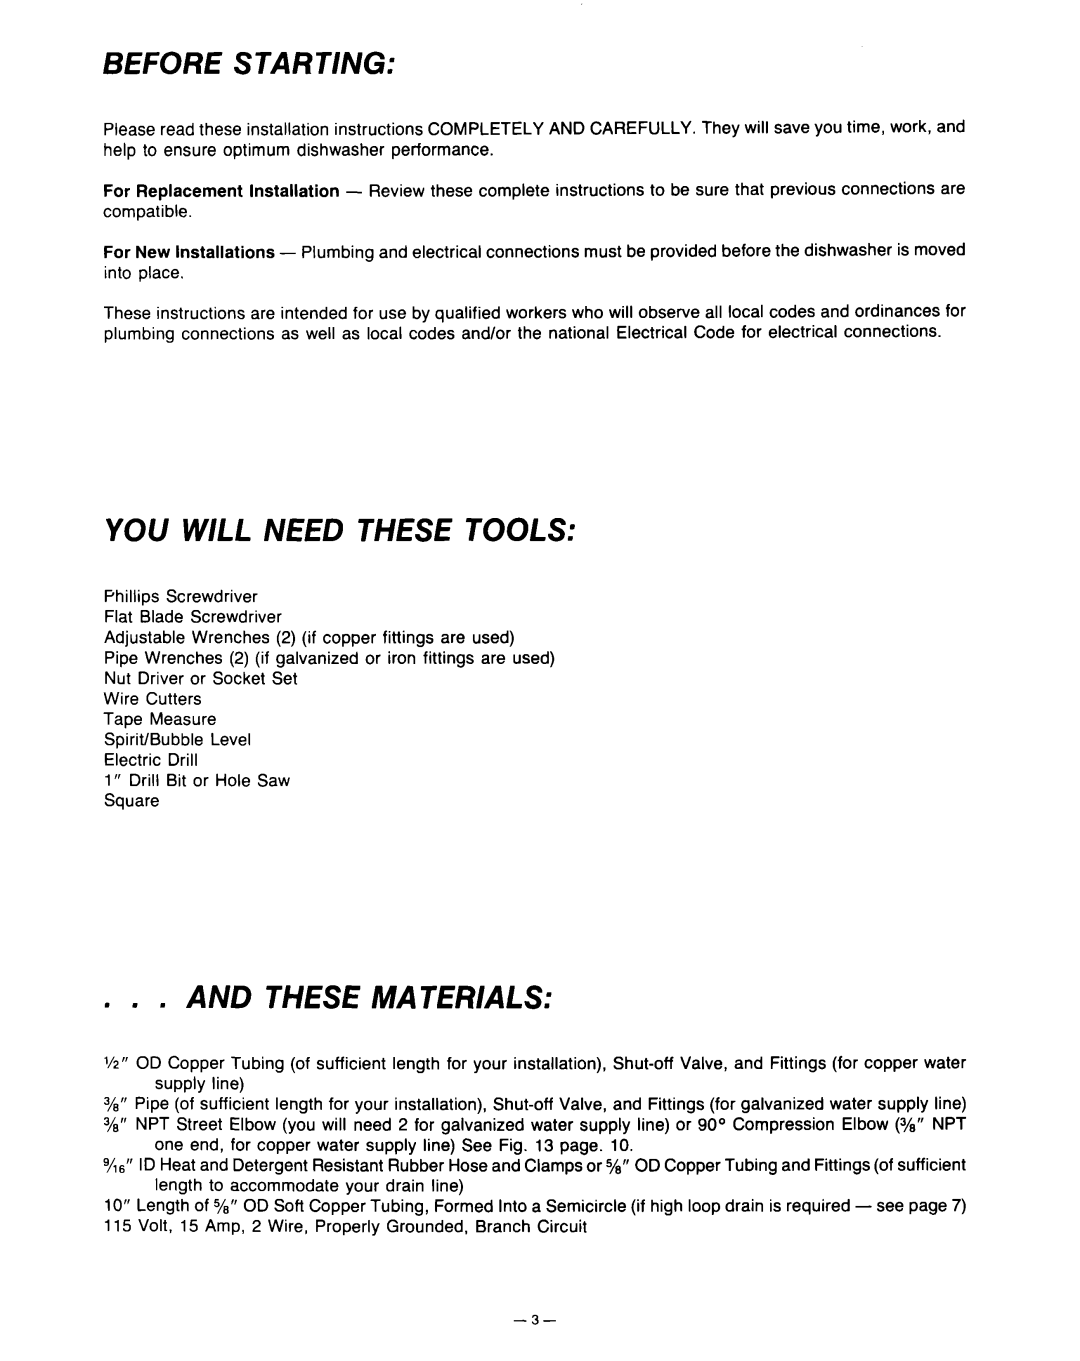 KitchenAid KD-27A installation instructions Before Starting, You Will Need These Tools, And These Materials 